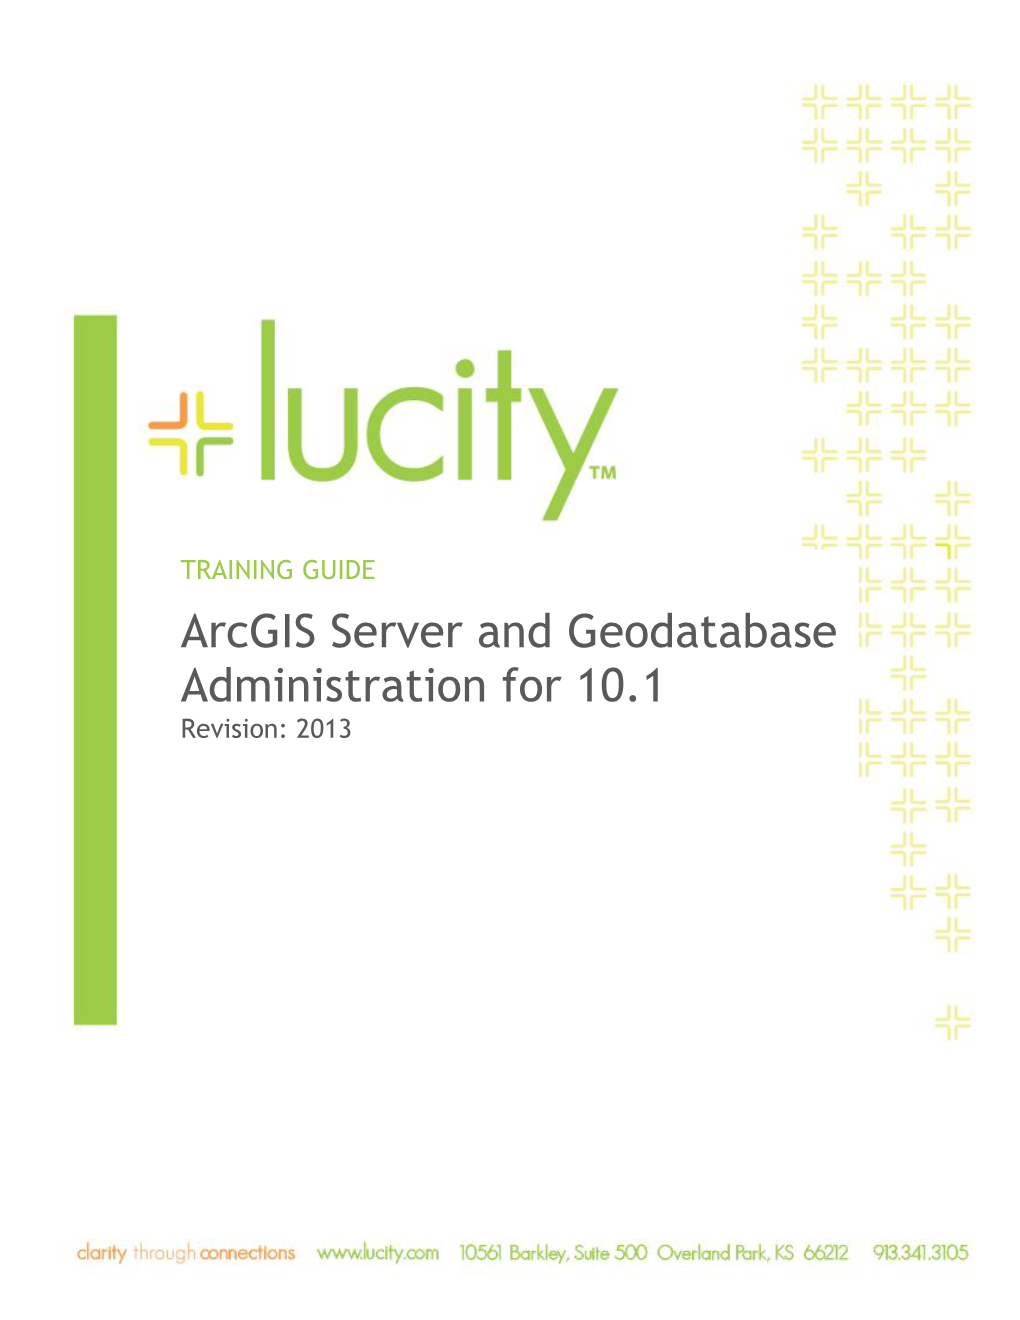 Arcgis Server and Geodatabase Administration for 10.1 Revision: 2013